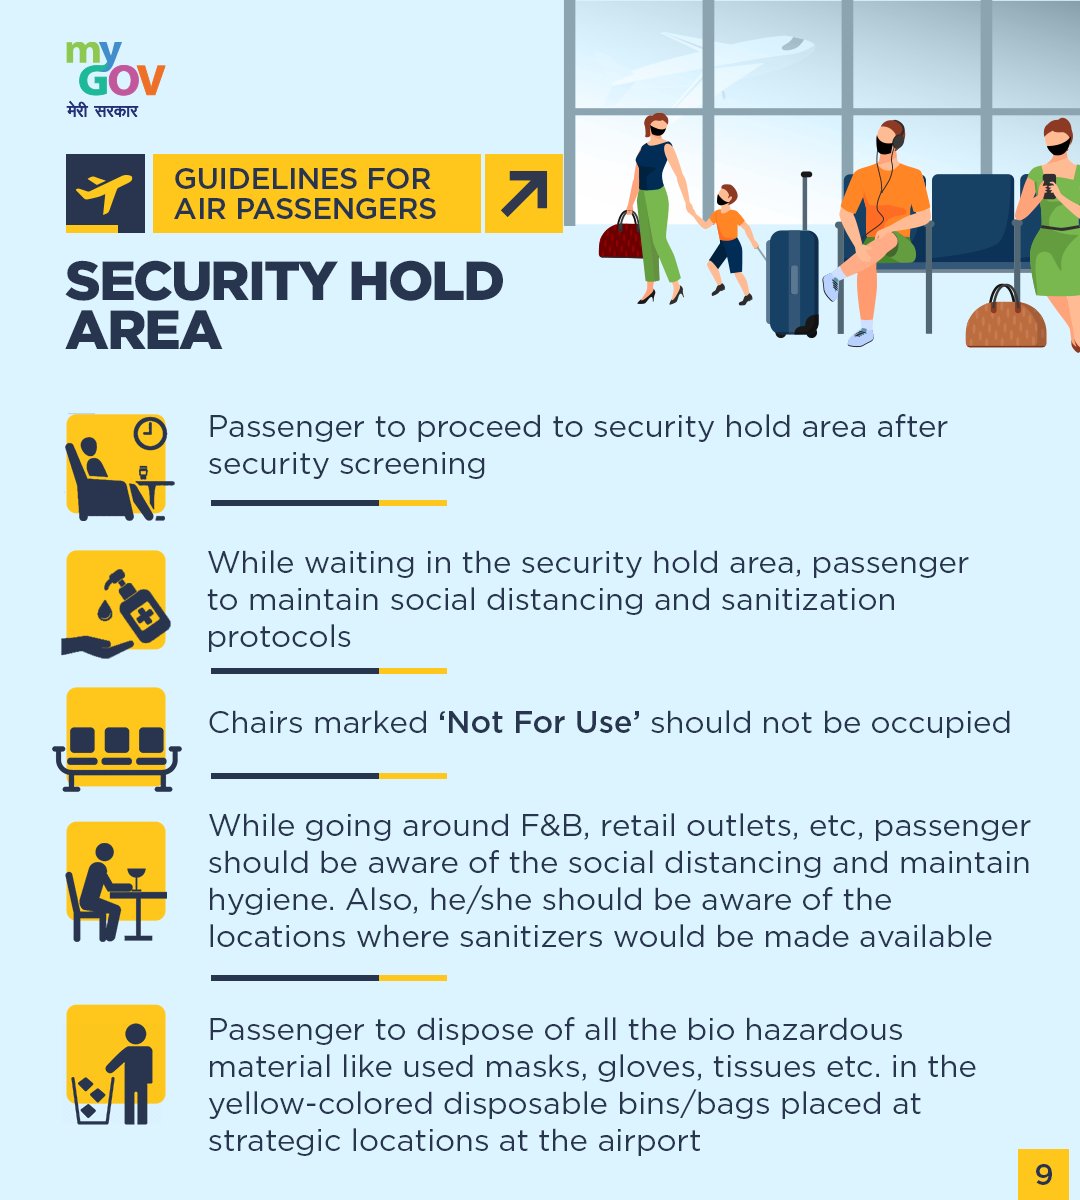 Here are the instructions to be followed in the Security Hold Area at the airport.  #IndiaFightsCorona